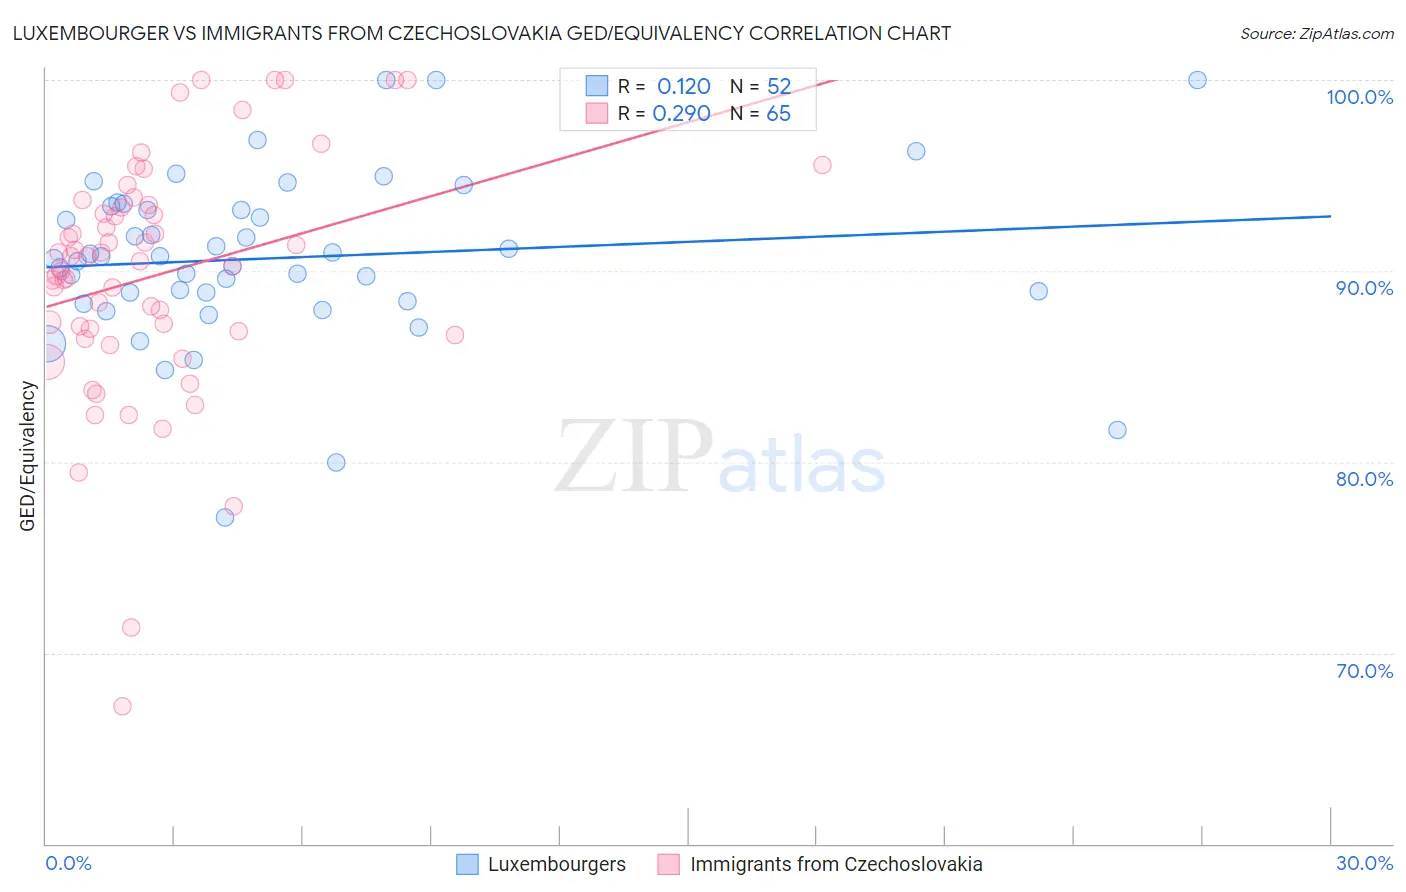 Luxembourger vs Immigrants from Czechoslovakia GED/Equivalency